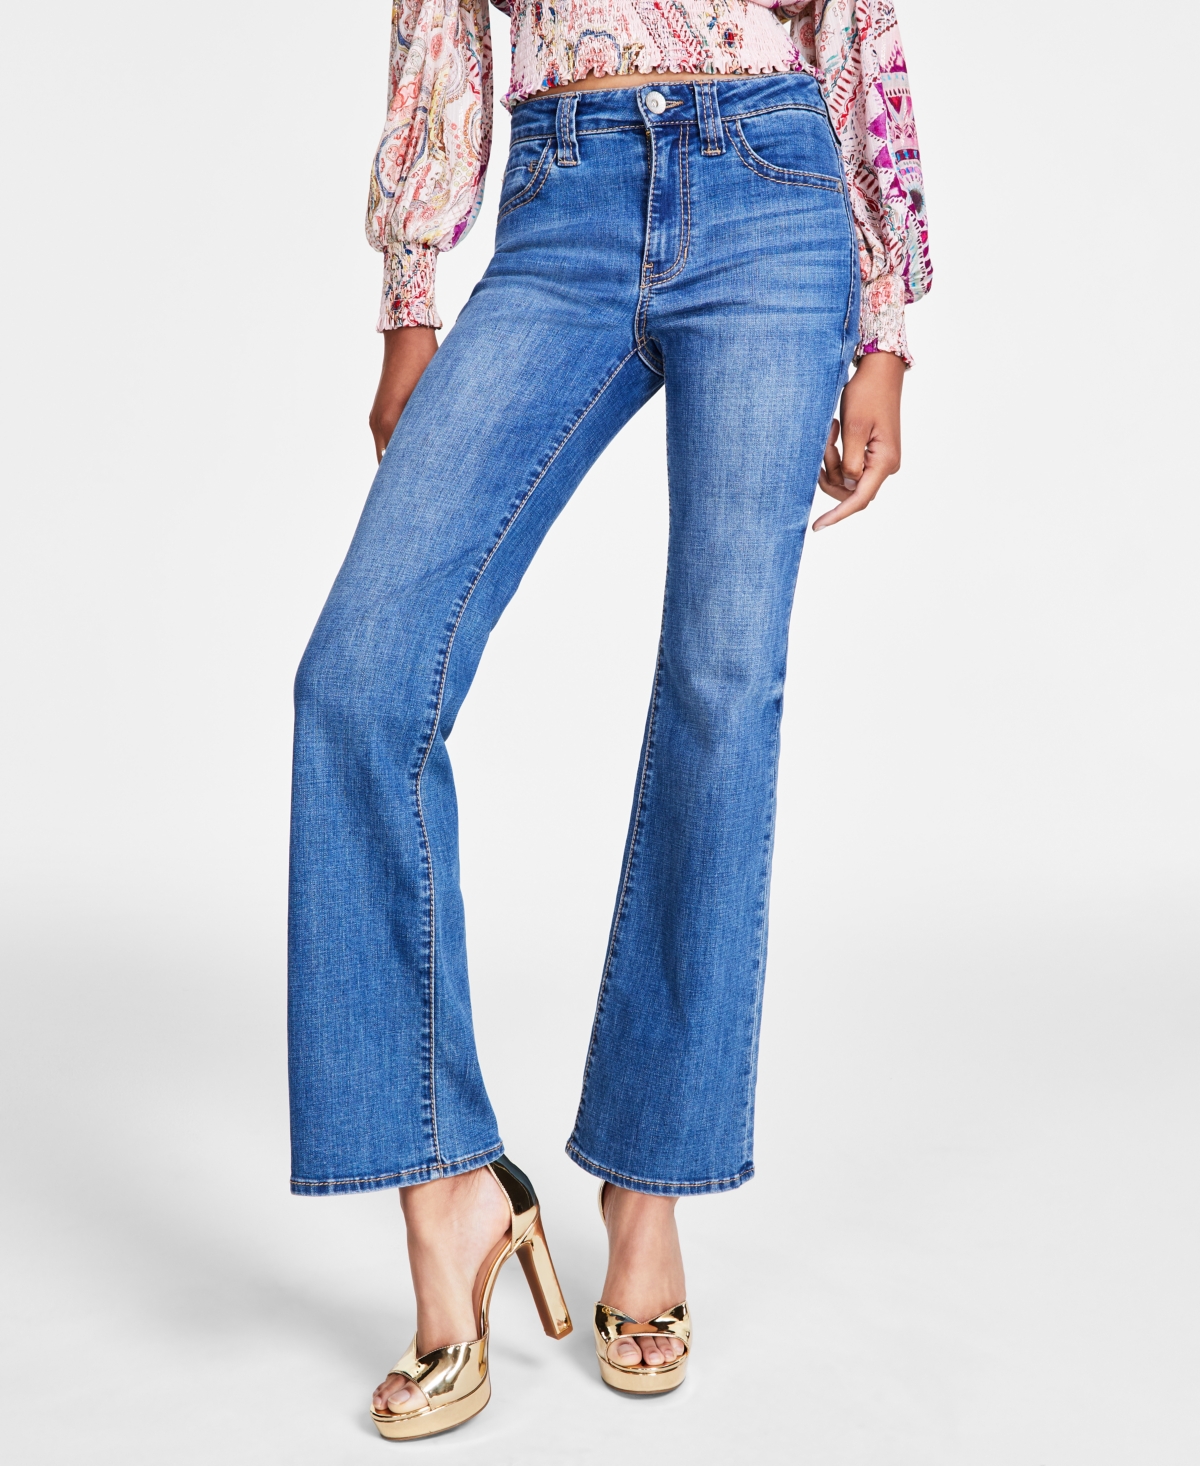 Guess Women's Sexy Bootcut Mid-rise Denim Jeans In Boca Blue